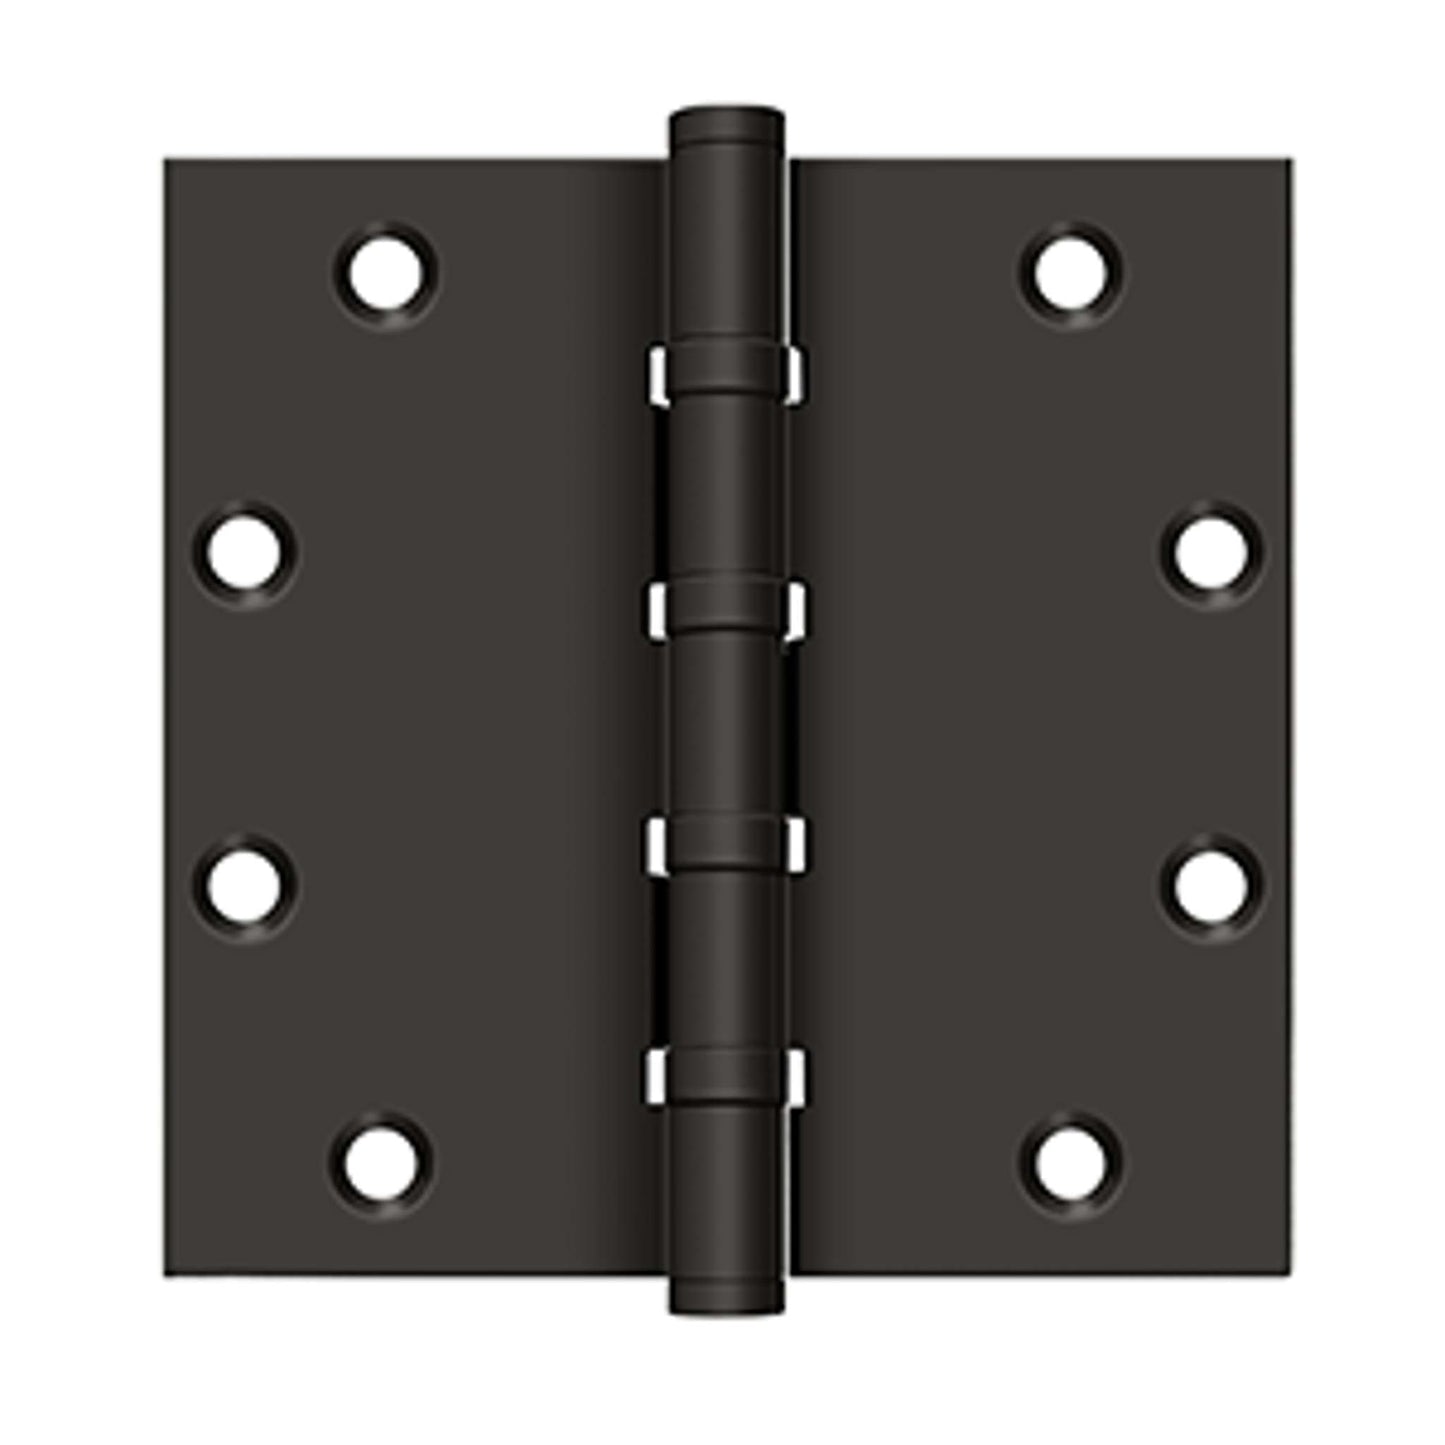 Deltana - 5" x 5" Square Hinges, Ball Bearings, Solid Brass Hinges